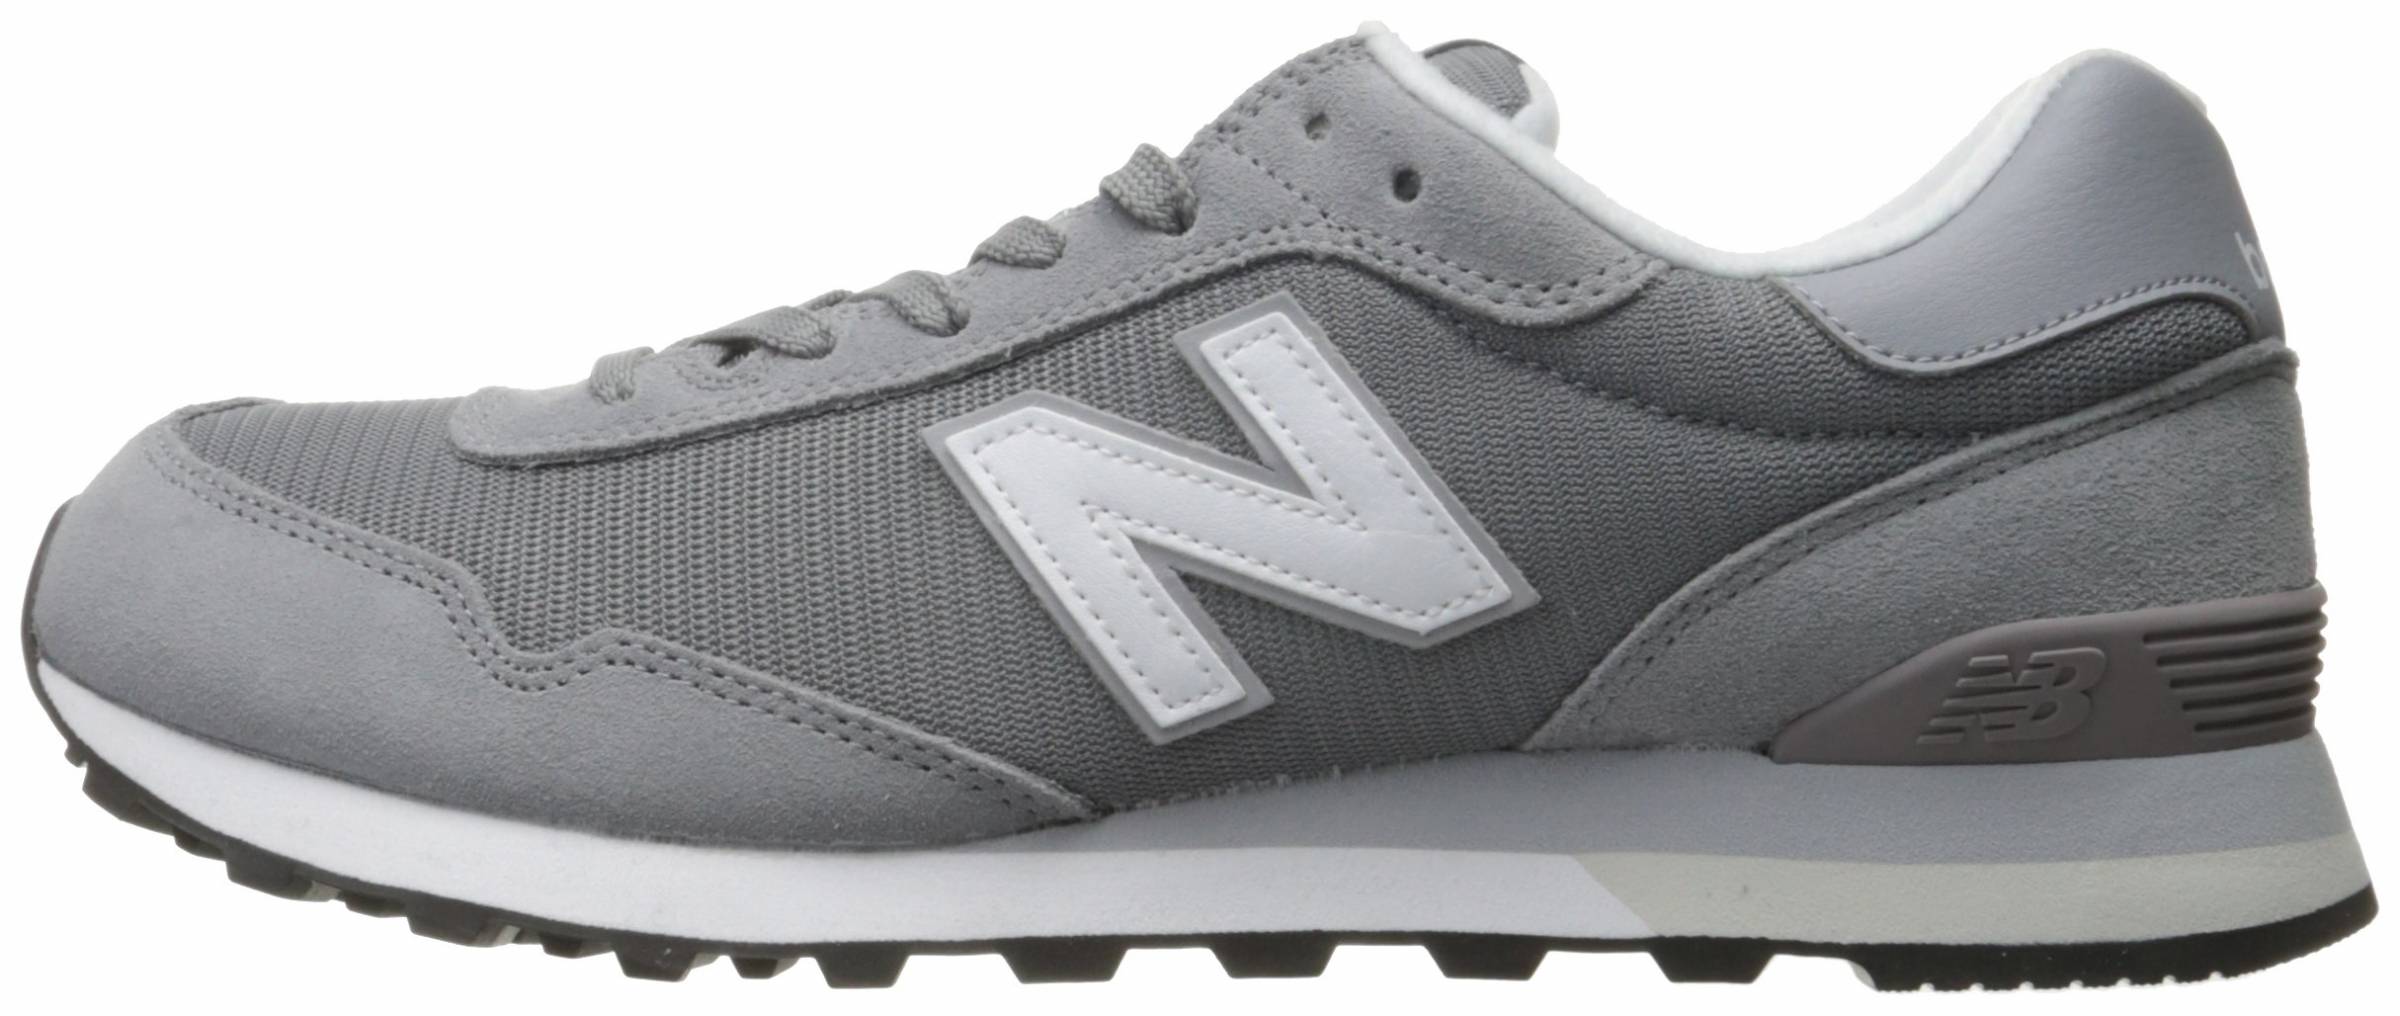 New Balance 515 sneakers in 10+ colors (only $38) | RunRepeat